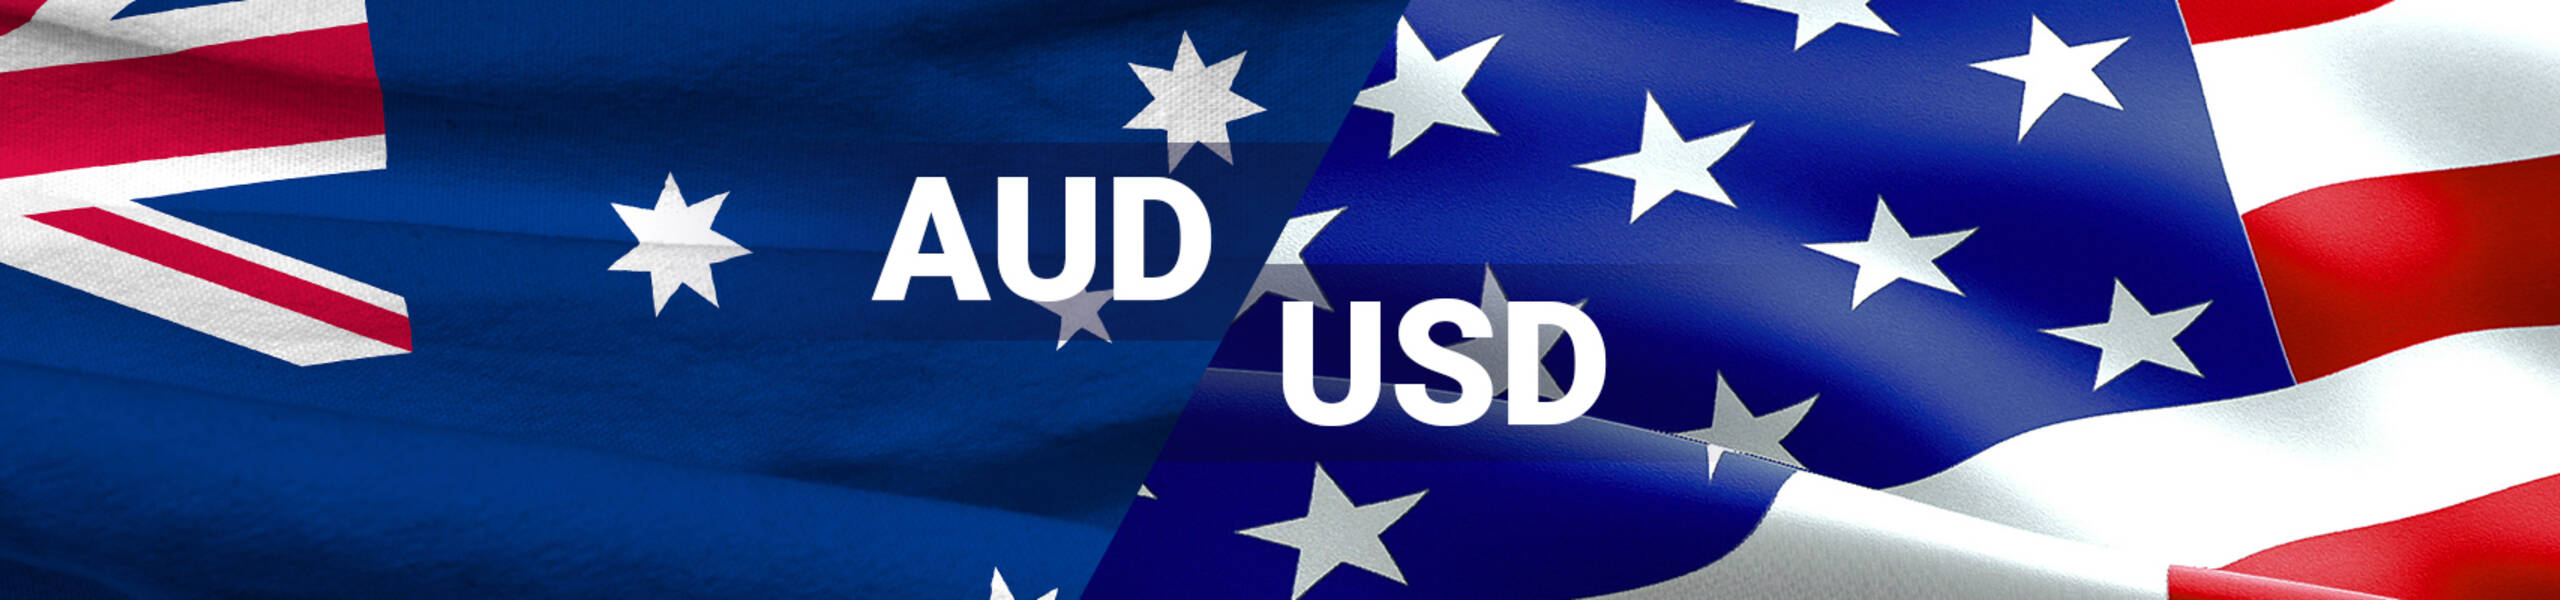 AUD/USD: the bulls will be given a third attempt